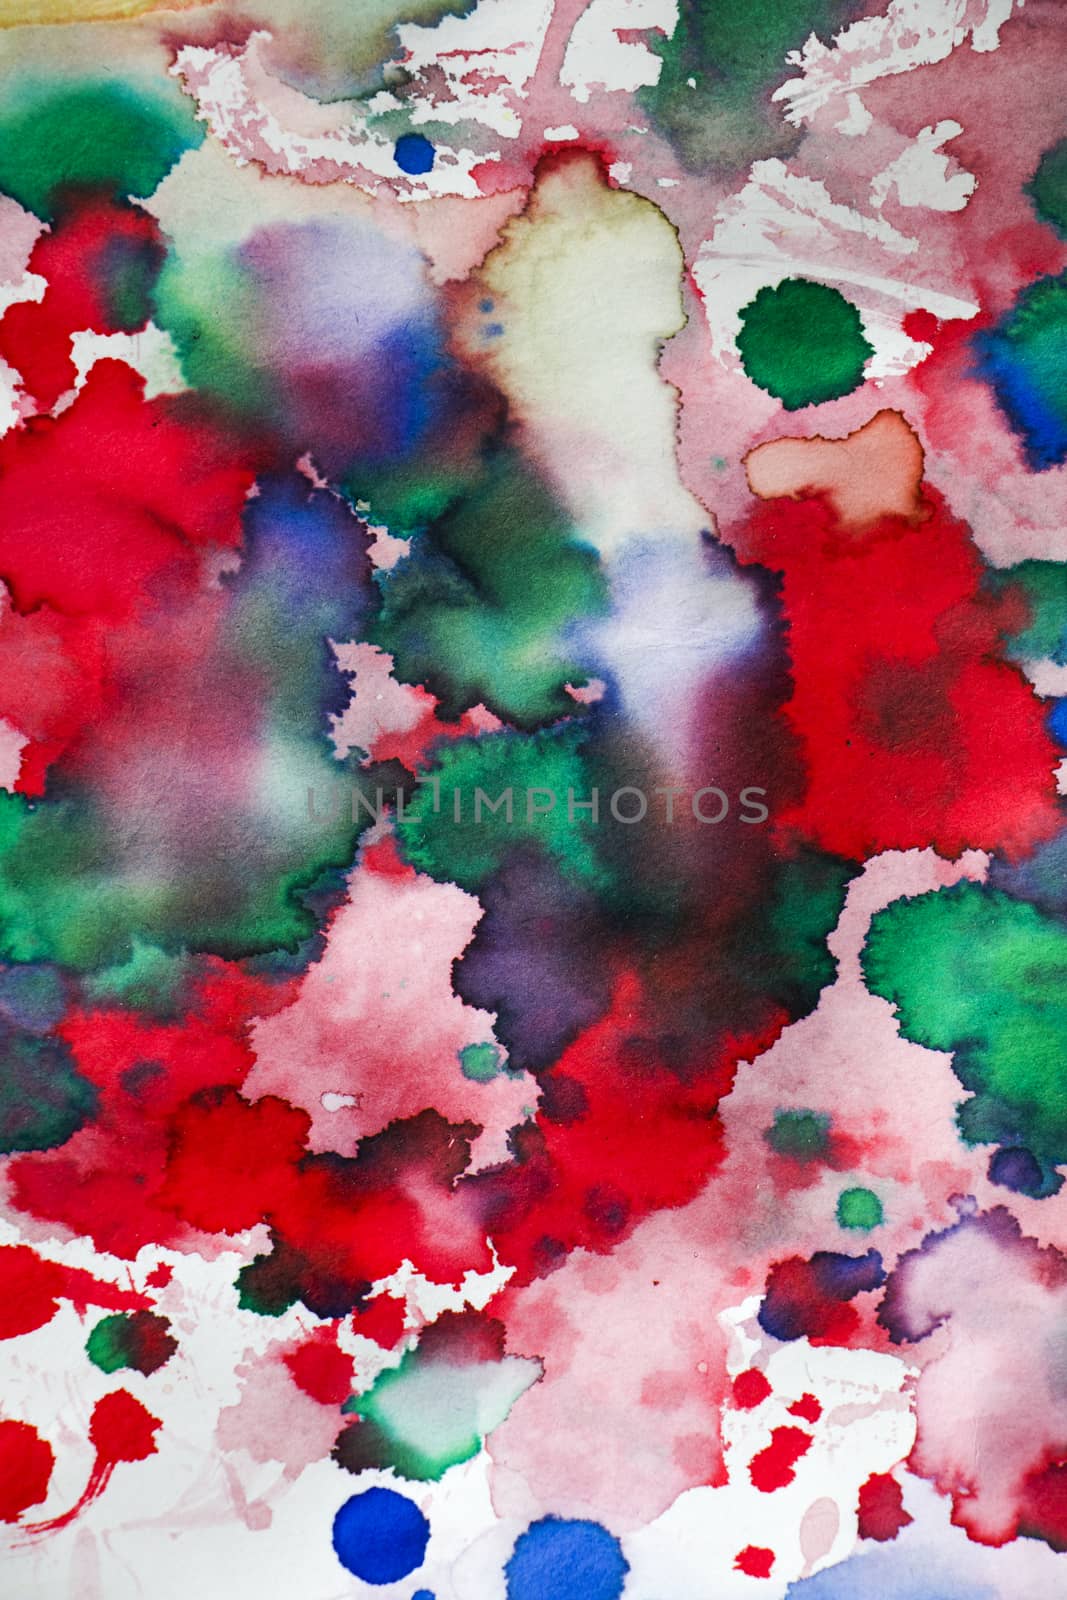 Ink drops on the paper, red, green and blue ink splashes background, painting and drawing